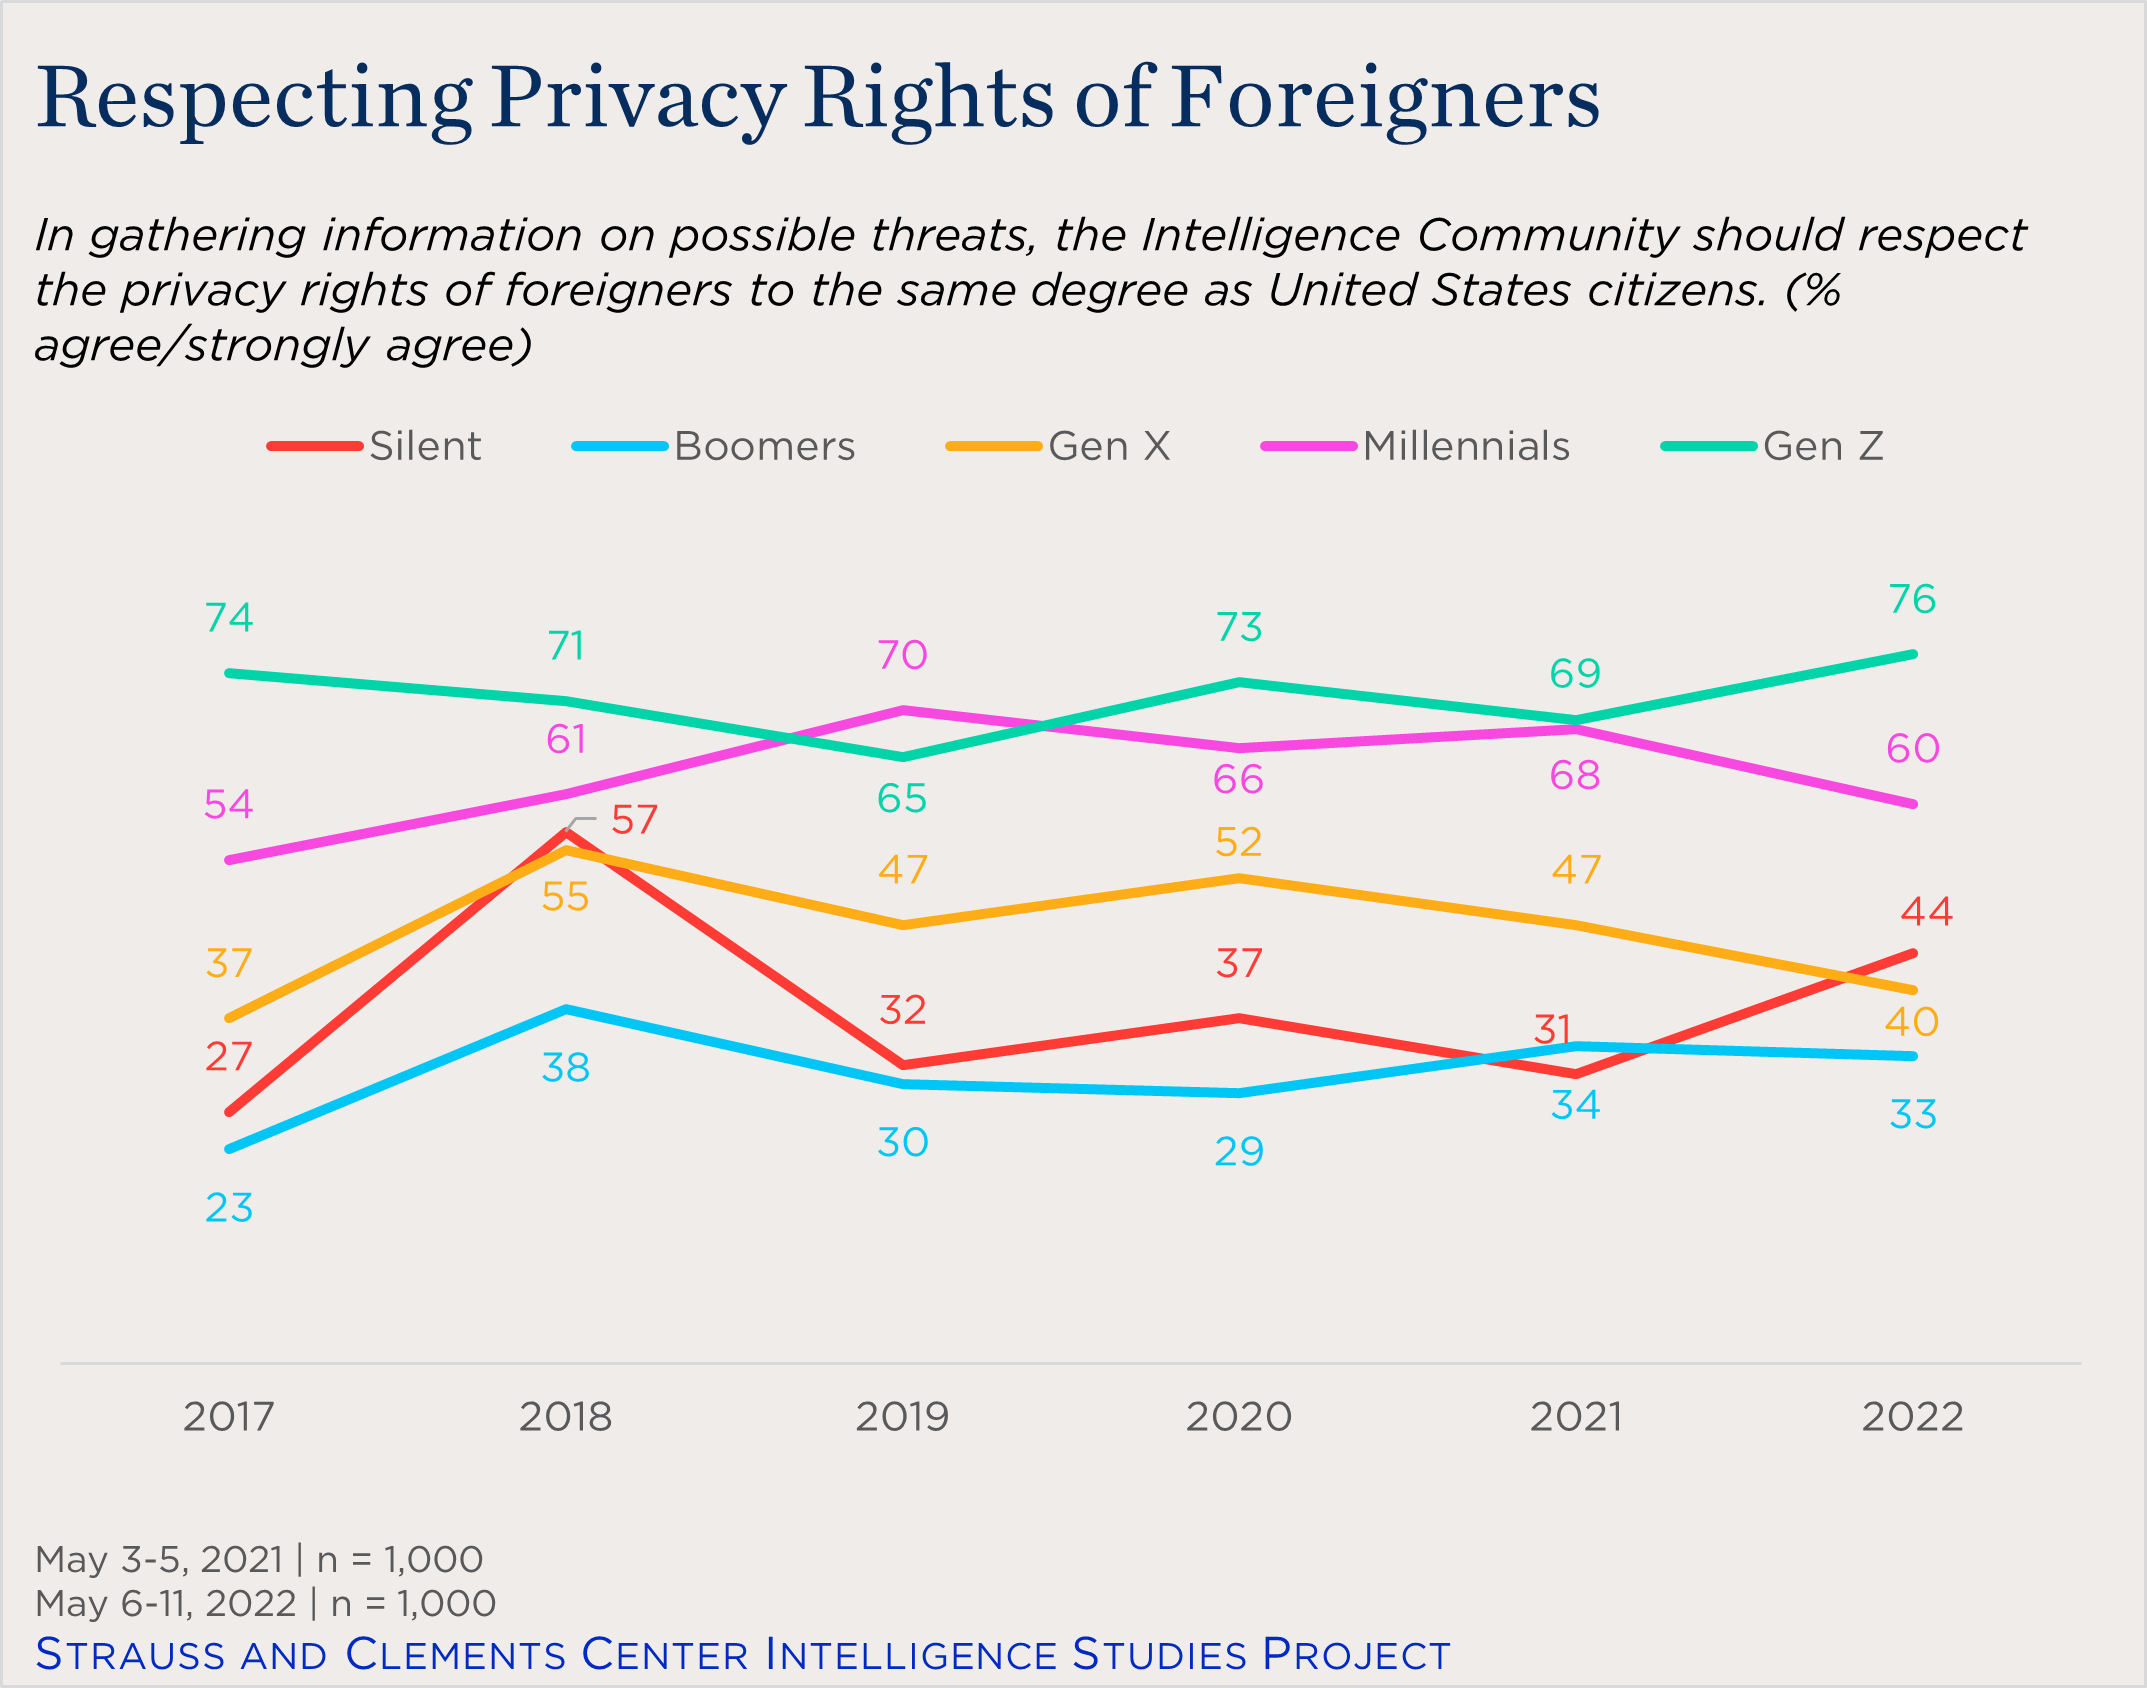 "line chart showing generational views of the IC and privacy rights of foreigners"